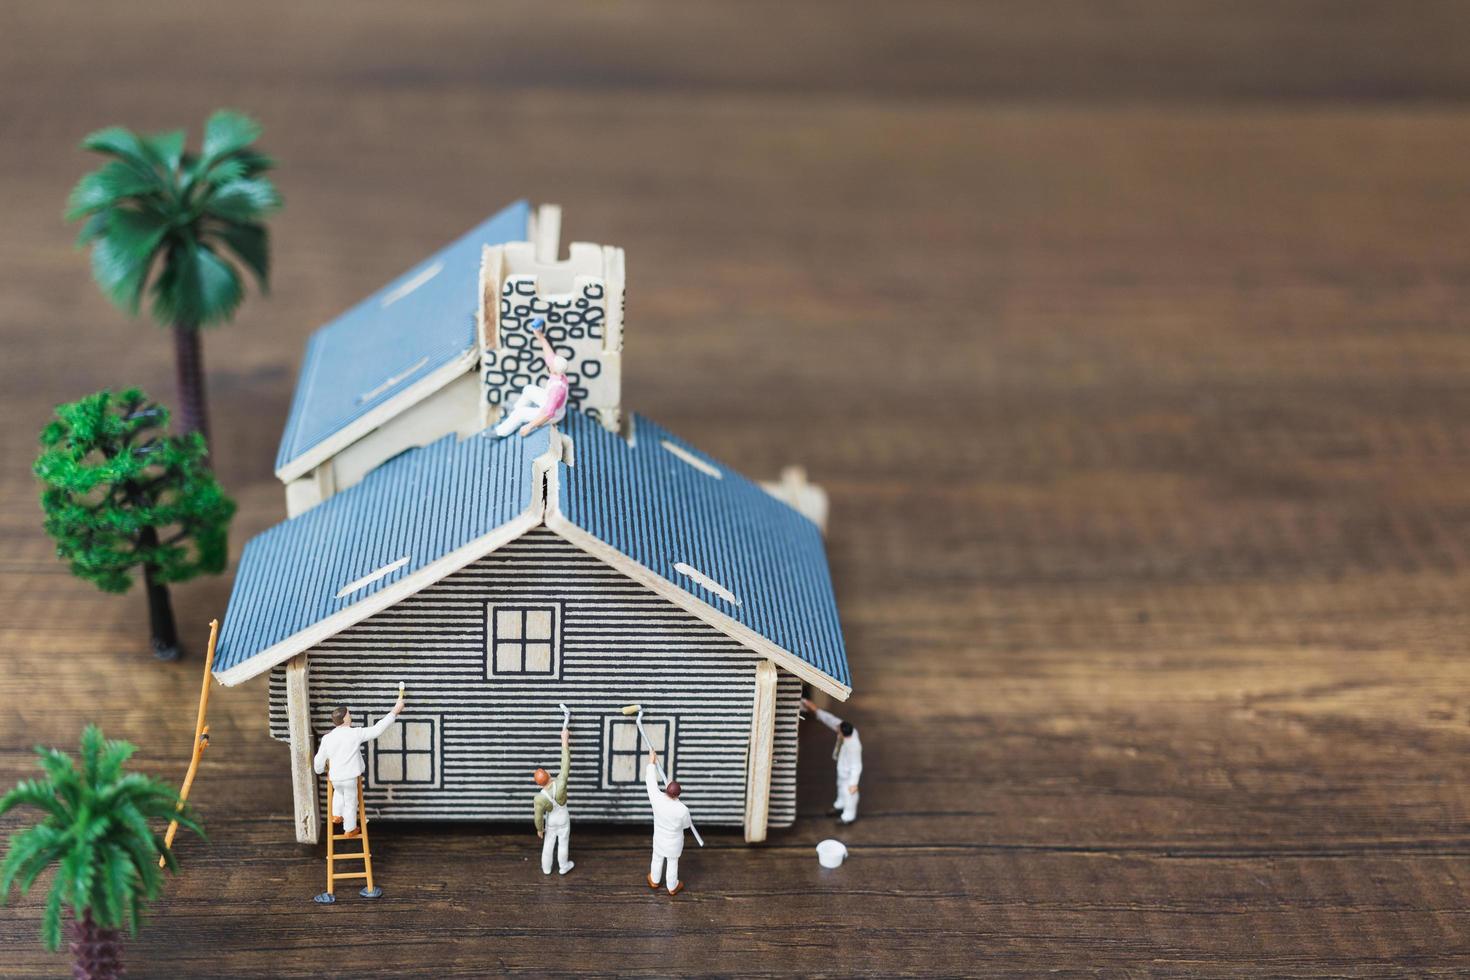 Miniature workers painting a new home, renovation concept photo